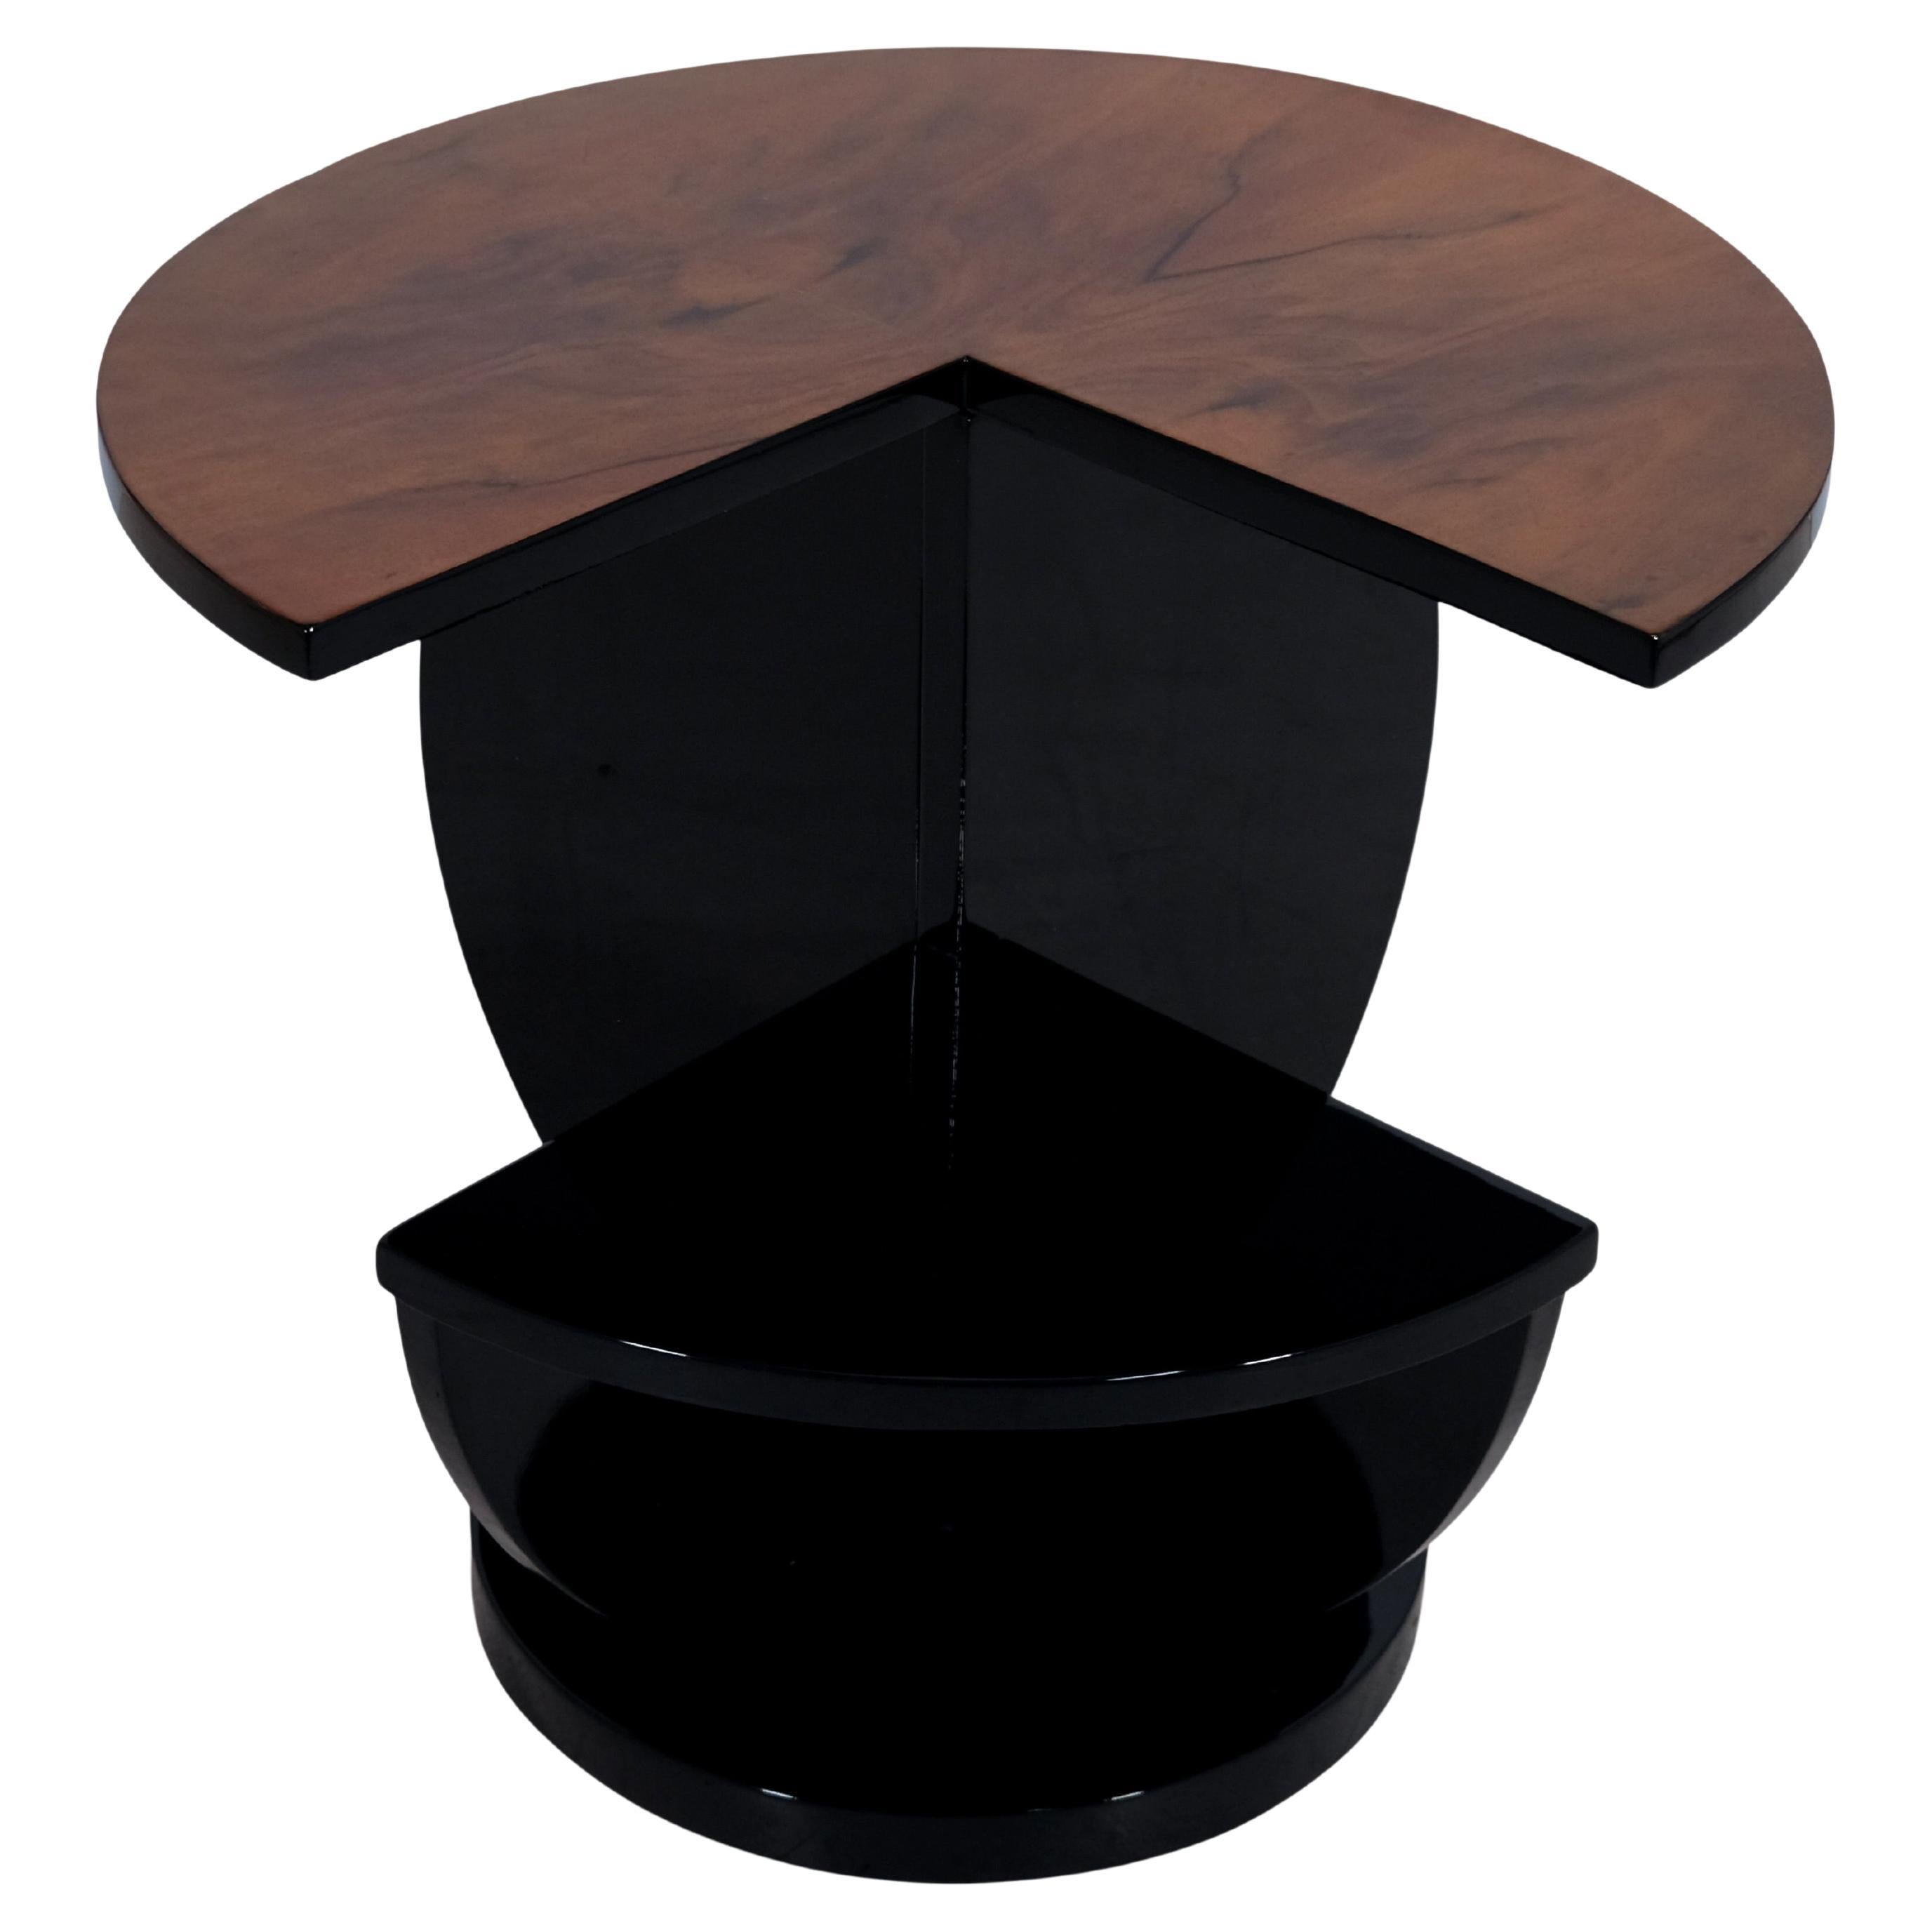 Segmented 1930s French Art Deco Side Table in High Gloss Black and Nutwood For Sale